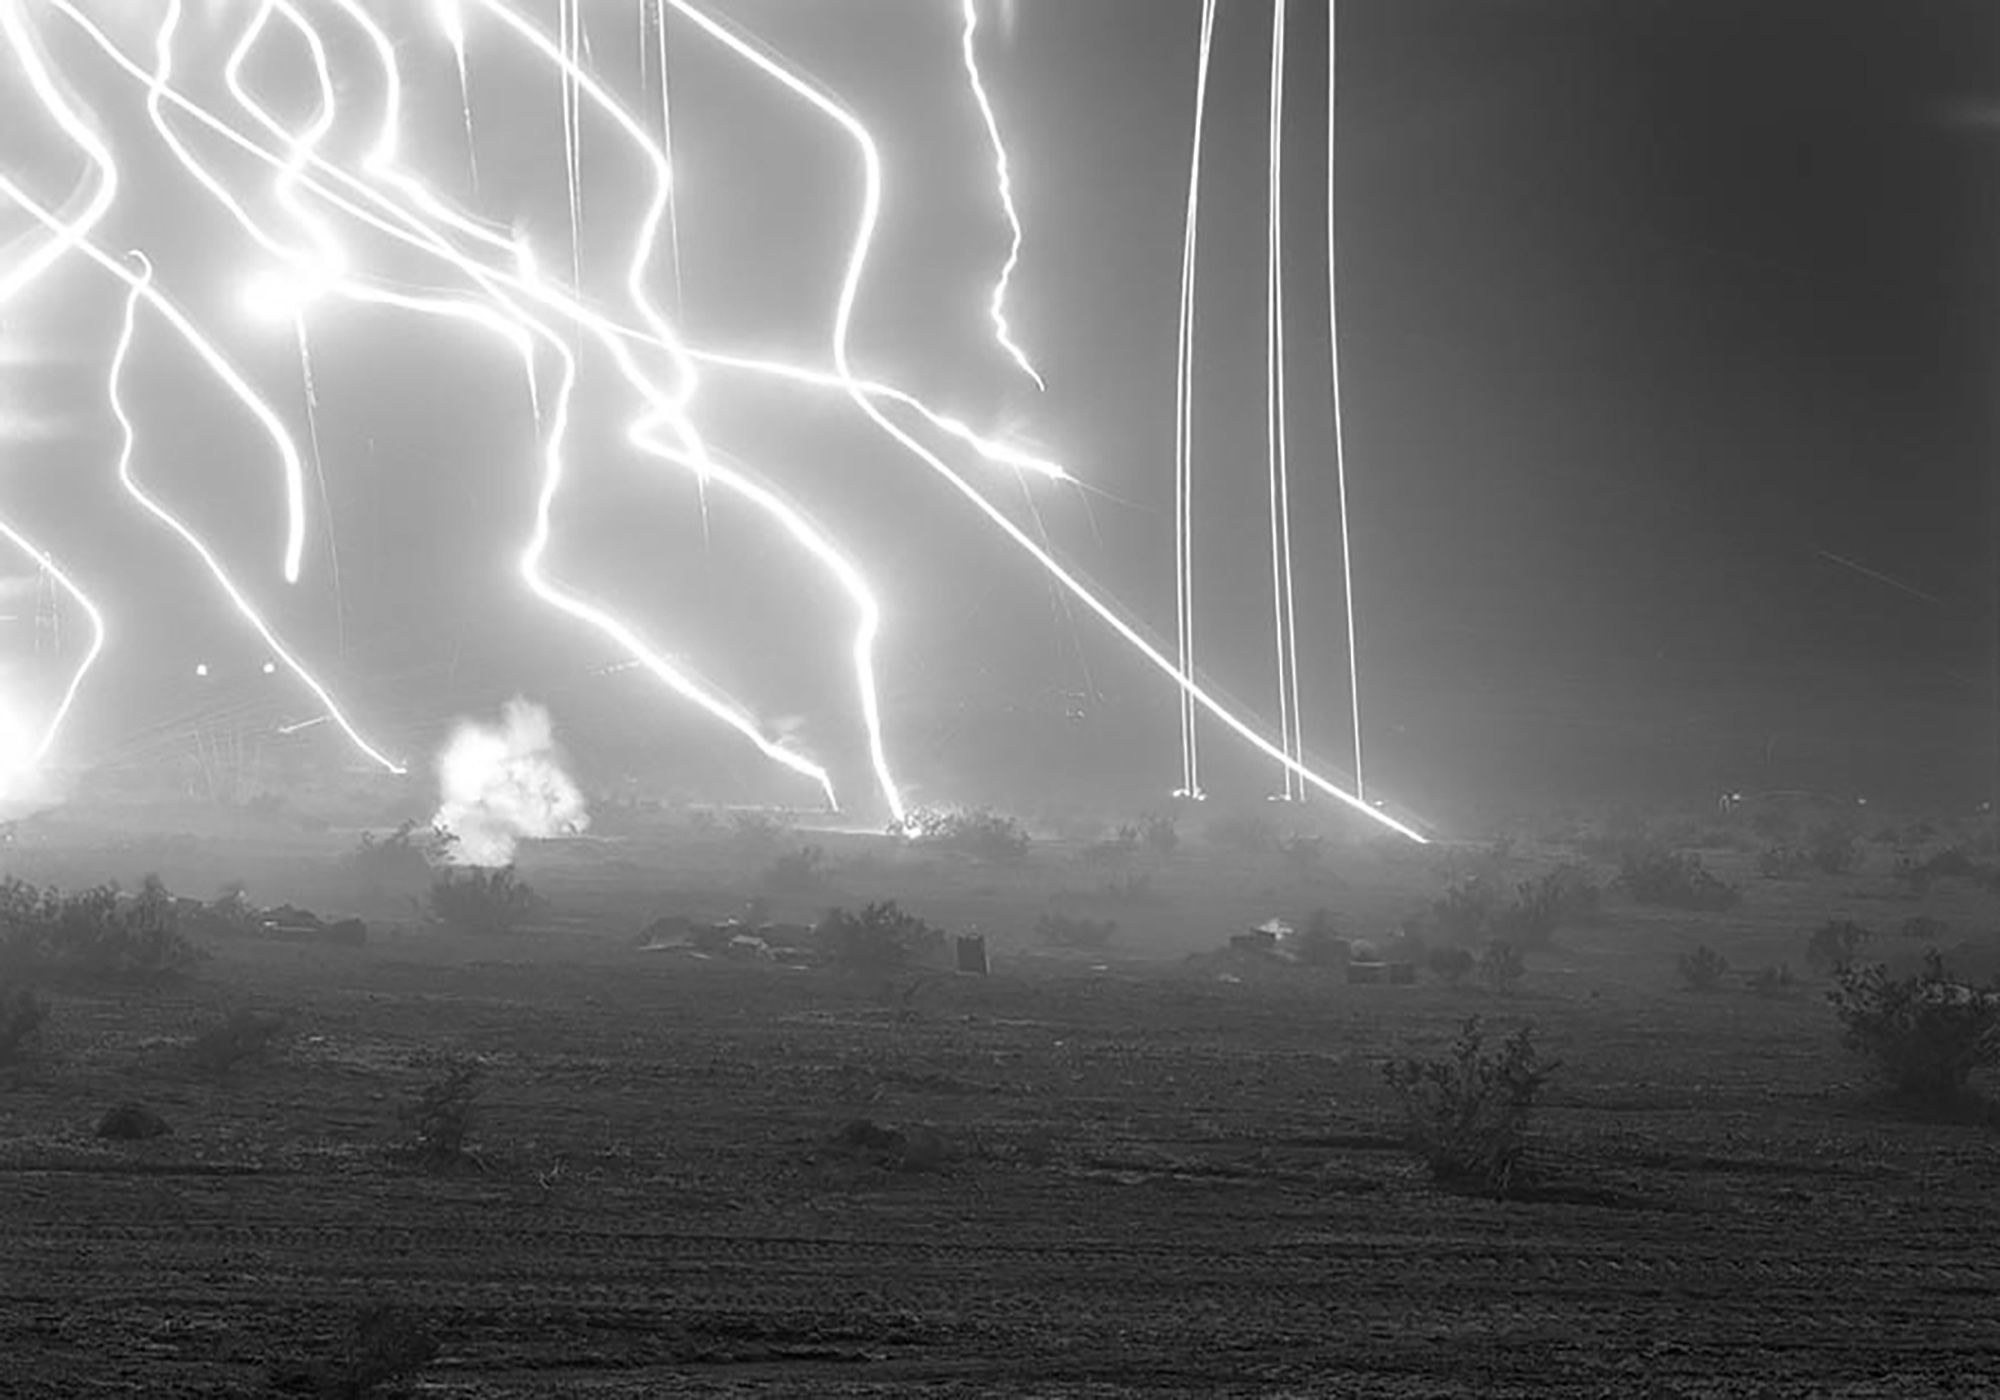 An-My Lê. "Night Operations III", from the series "29 Palms (2003-2004)."